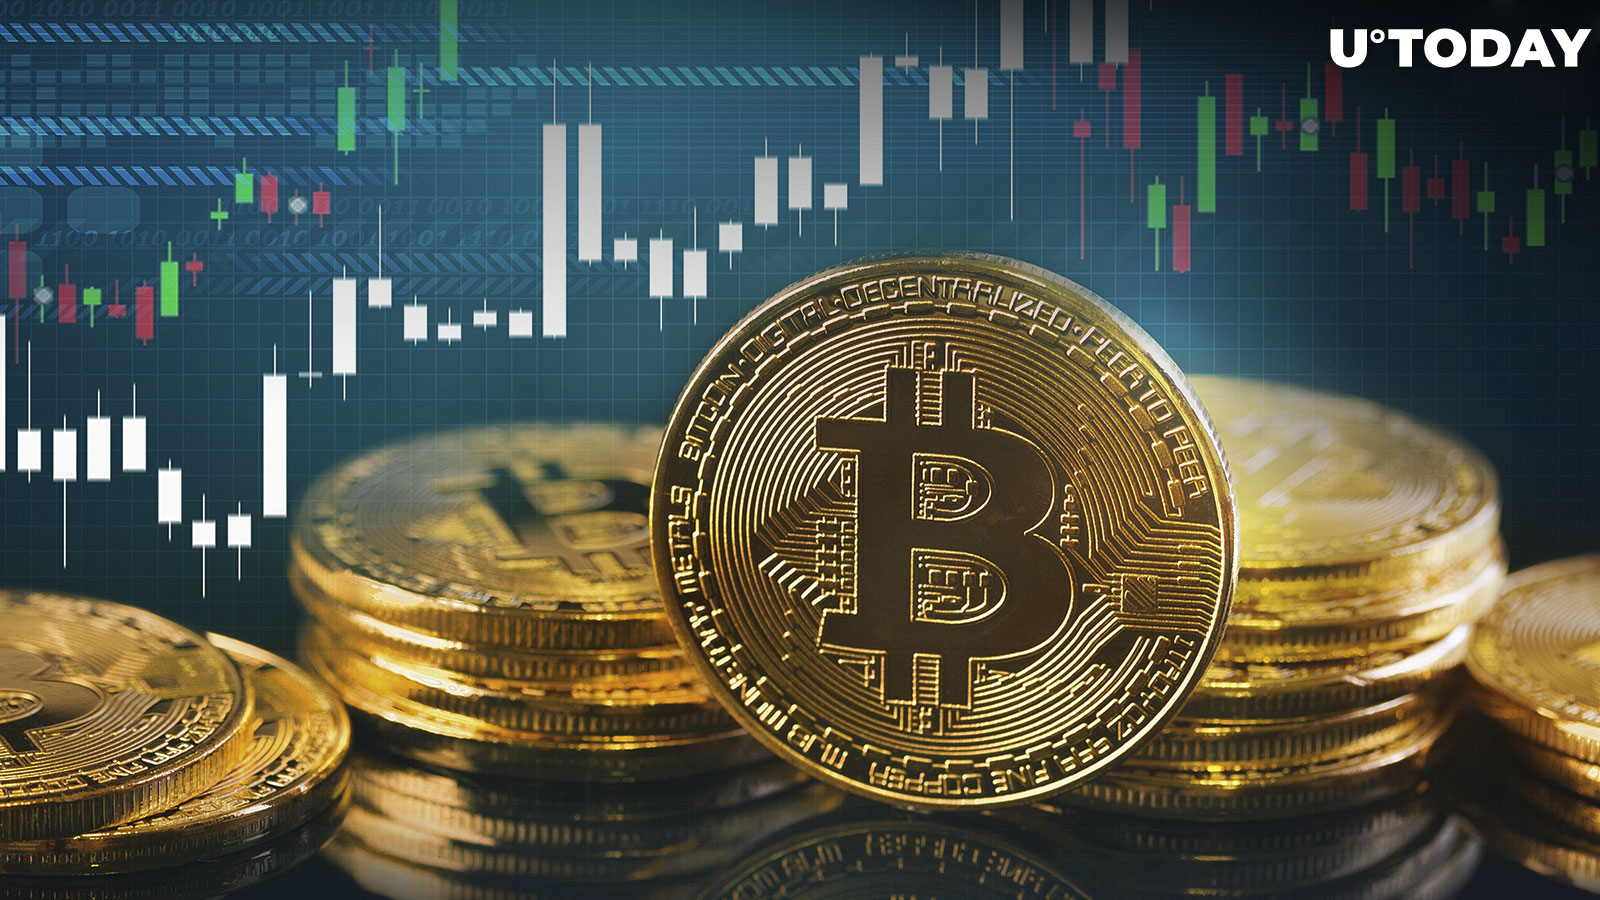 Bitcoin Outperforms NASDAQ, S&P 500, Dow Jones, and Gold Combined